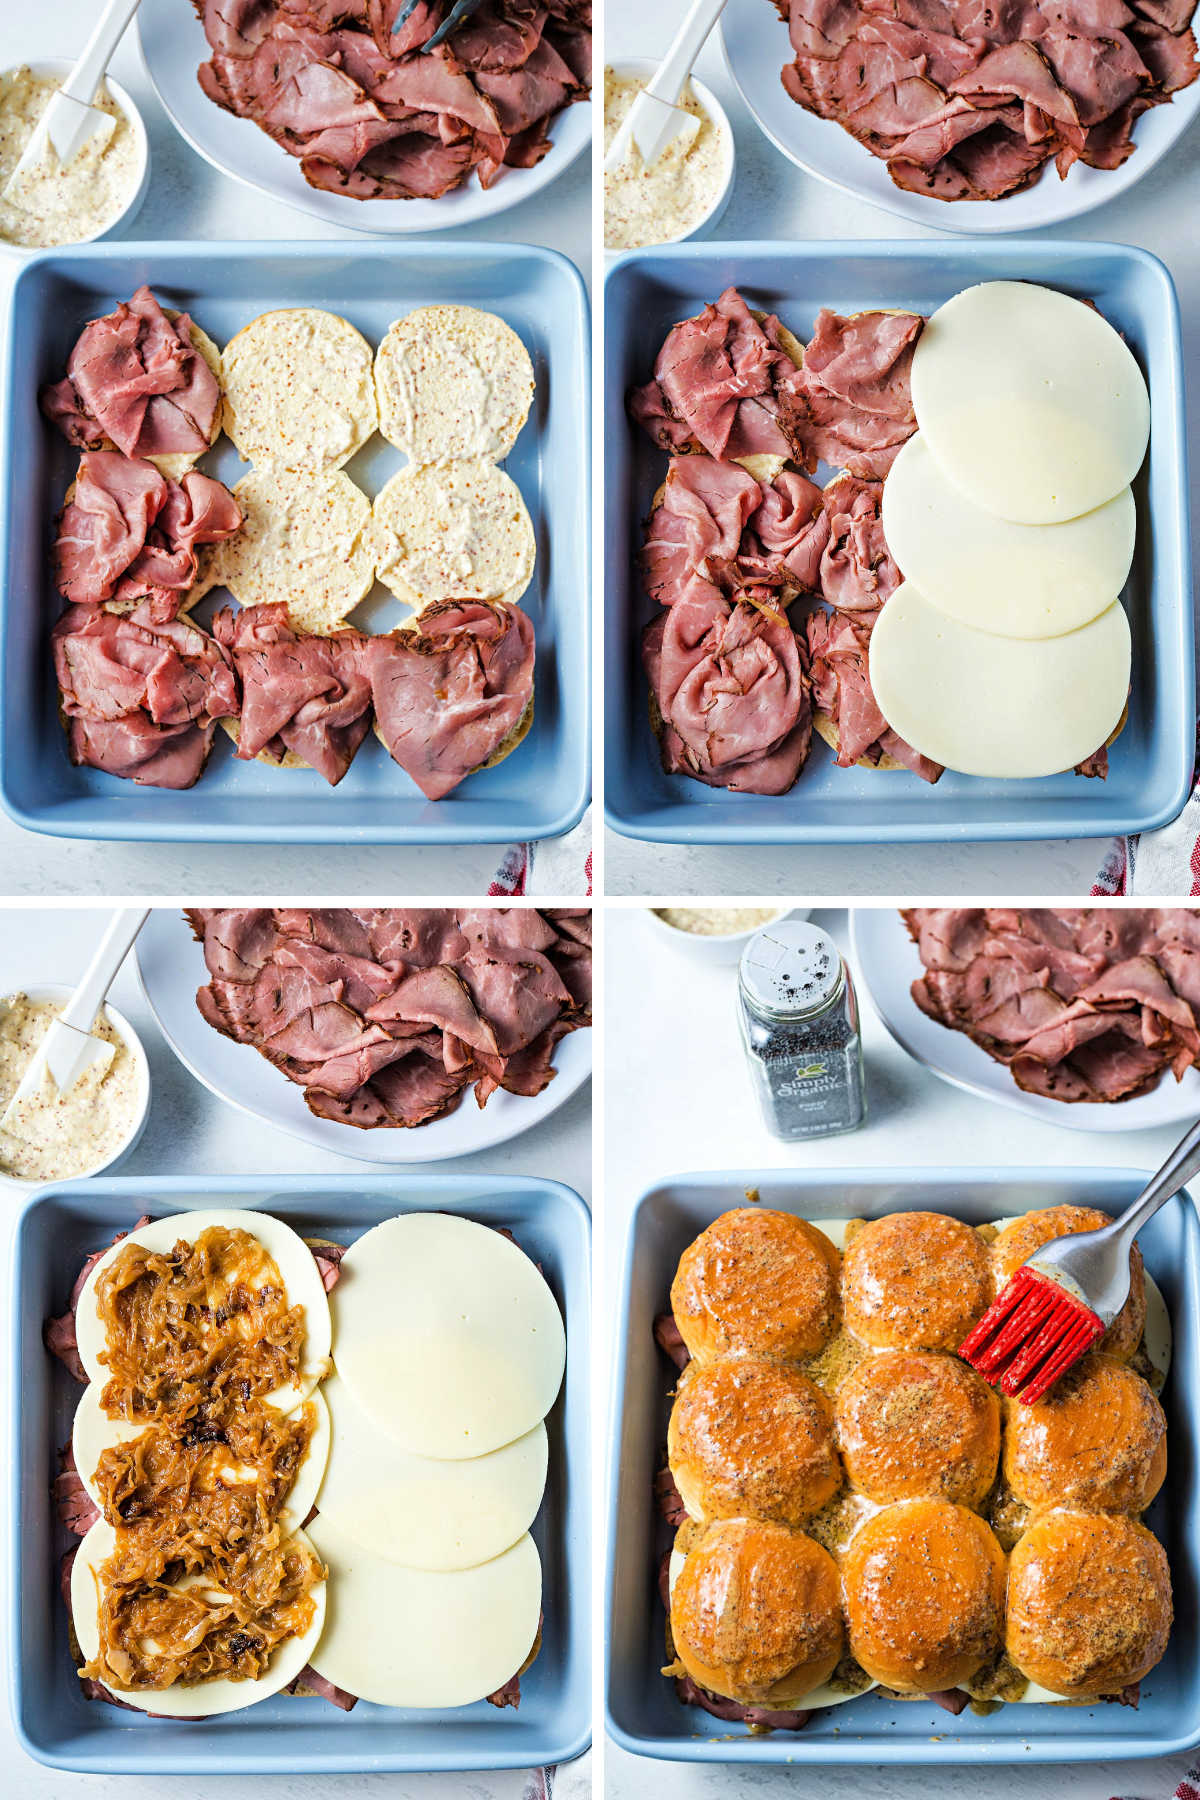 process steps for making roast beef sliders: spread aioli on buns, layer roast beef; layer cheese; layer onions; spread butter sauce on top buns.